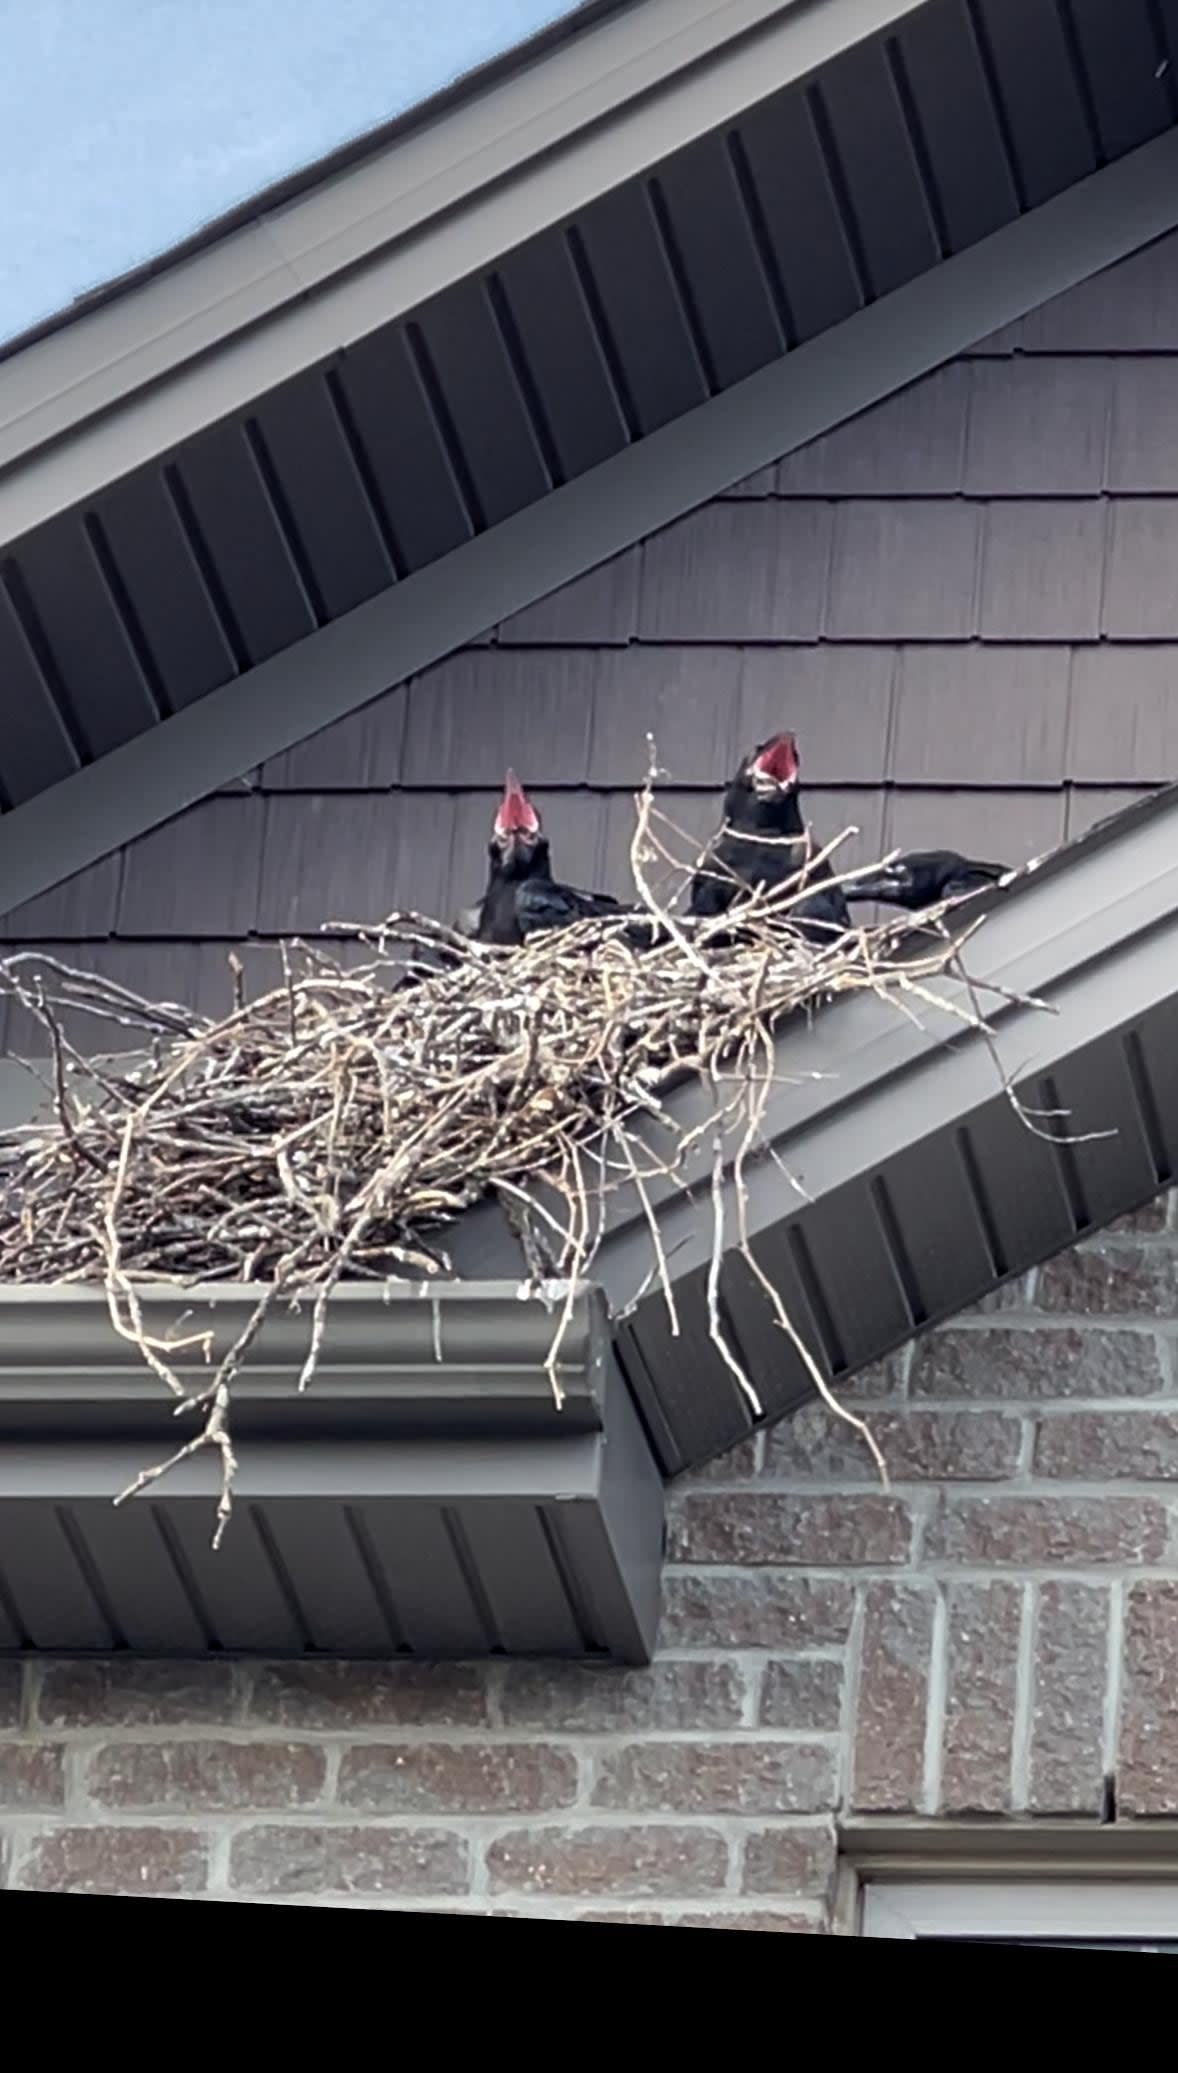 Nestlings await the return of their parents under the protective eaves of a home on Fountainhead Drive in Orléans. (Submitted by Chelsey McLellan - image credit)